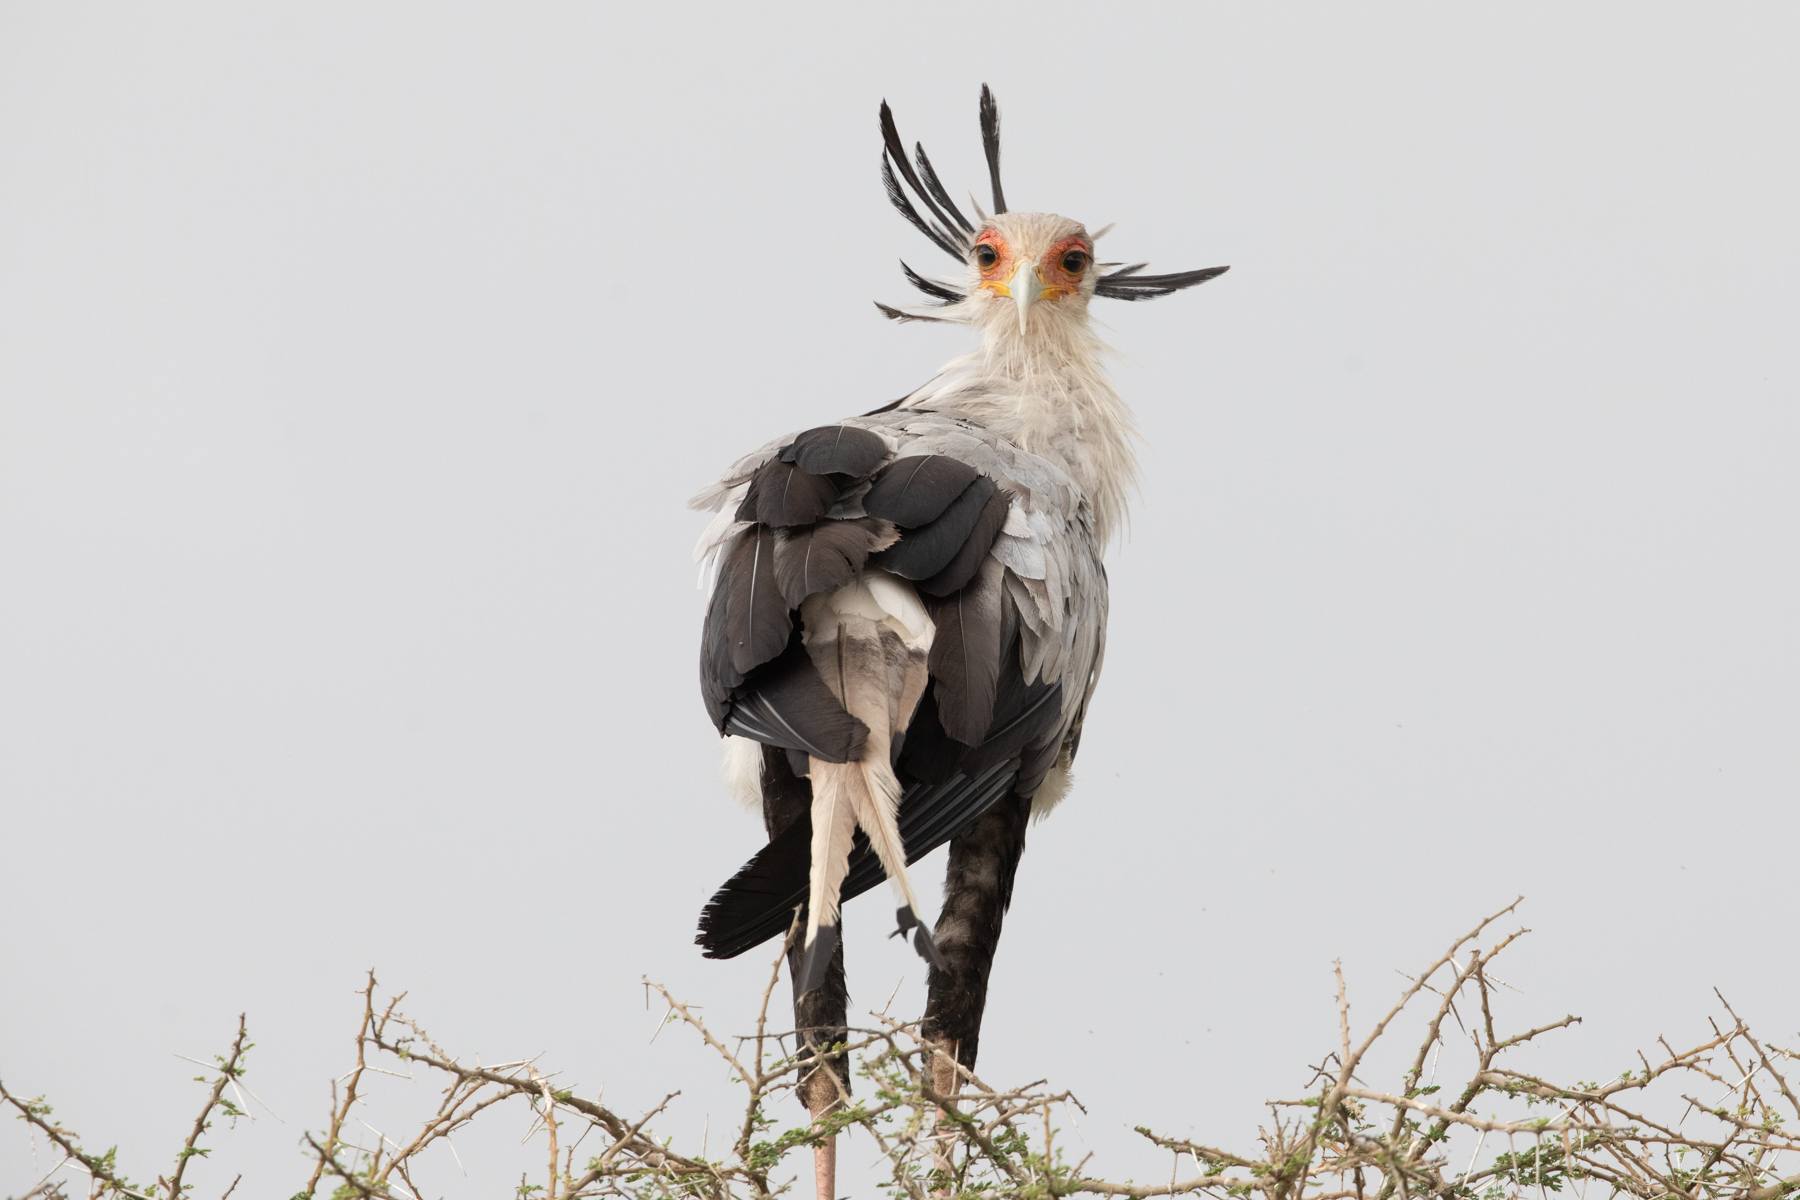 A Secretarybird takes a moment to stare at us in between preening